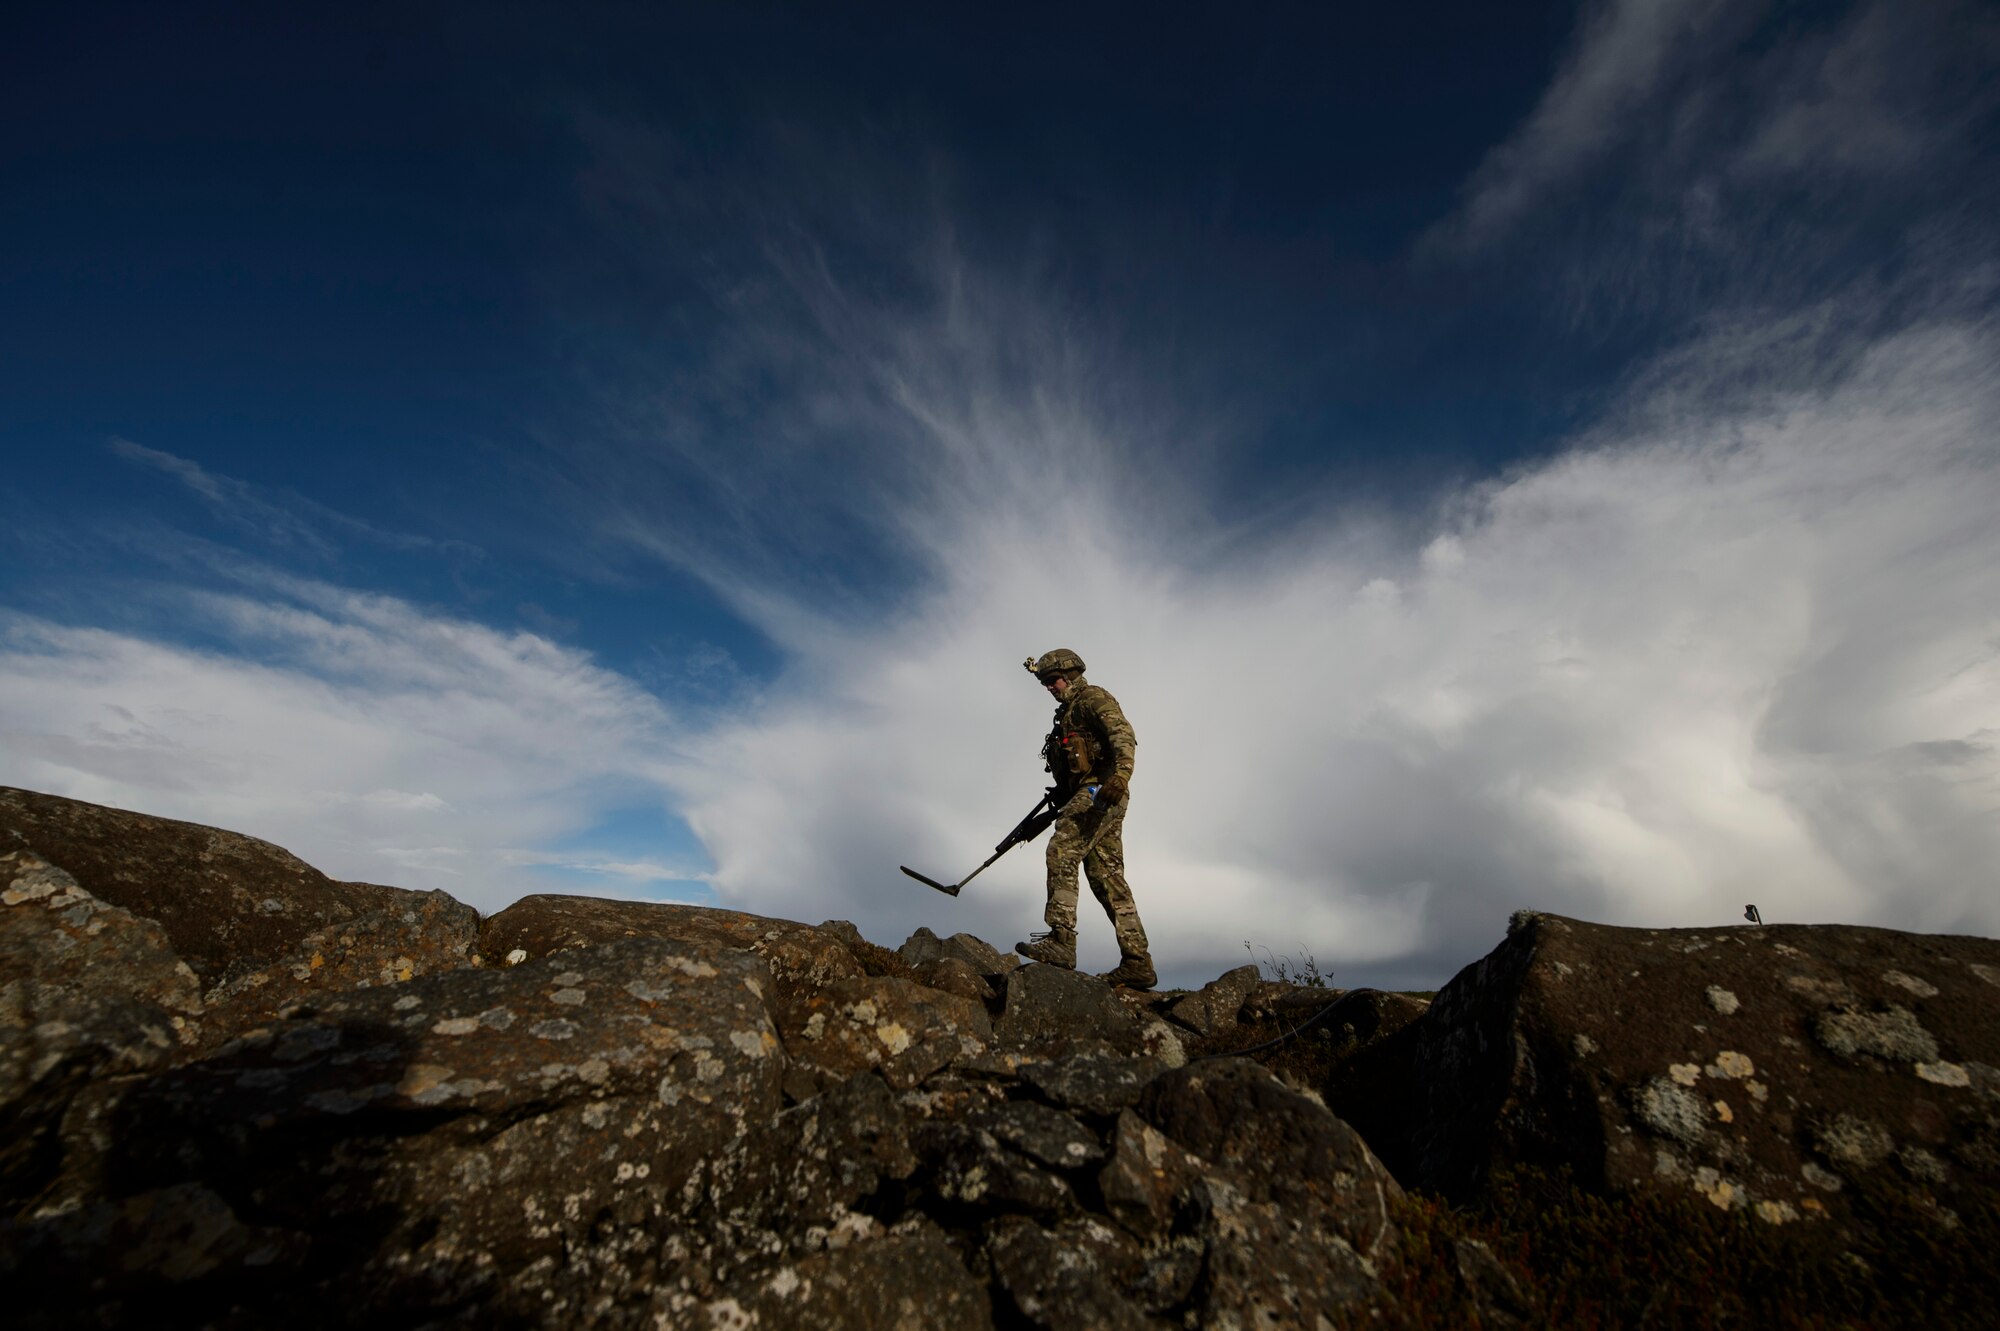 U.S. Air Force Staff Sgt. Cole Carroll, 52nd Civil Engineer Squadron explosive ordnance disposal craftsman, Spangdahlem Air Base, Germany, sweeps an area with a mine detector during Northern Challenge 16 exercise at Icelandic Coast Guard Keflavik Facility, Iceland, Sept. 19, 2016. The exercise focused on disabling improvised explosive devices in support of counter-terrorism tactics to prepare Partnership for Peace, NATO, and Nordic nations for international deployments and defense against terrorism. (U.S. Air Force photo by Staff Sgt. Jonathan Snyder)             